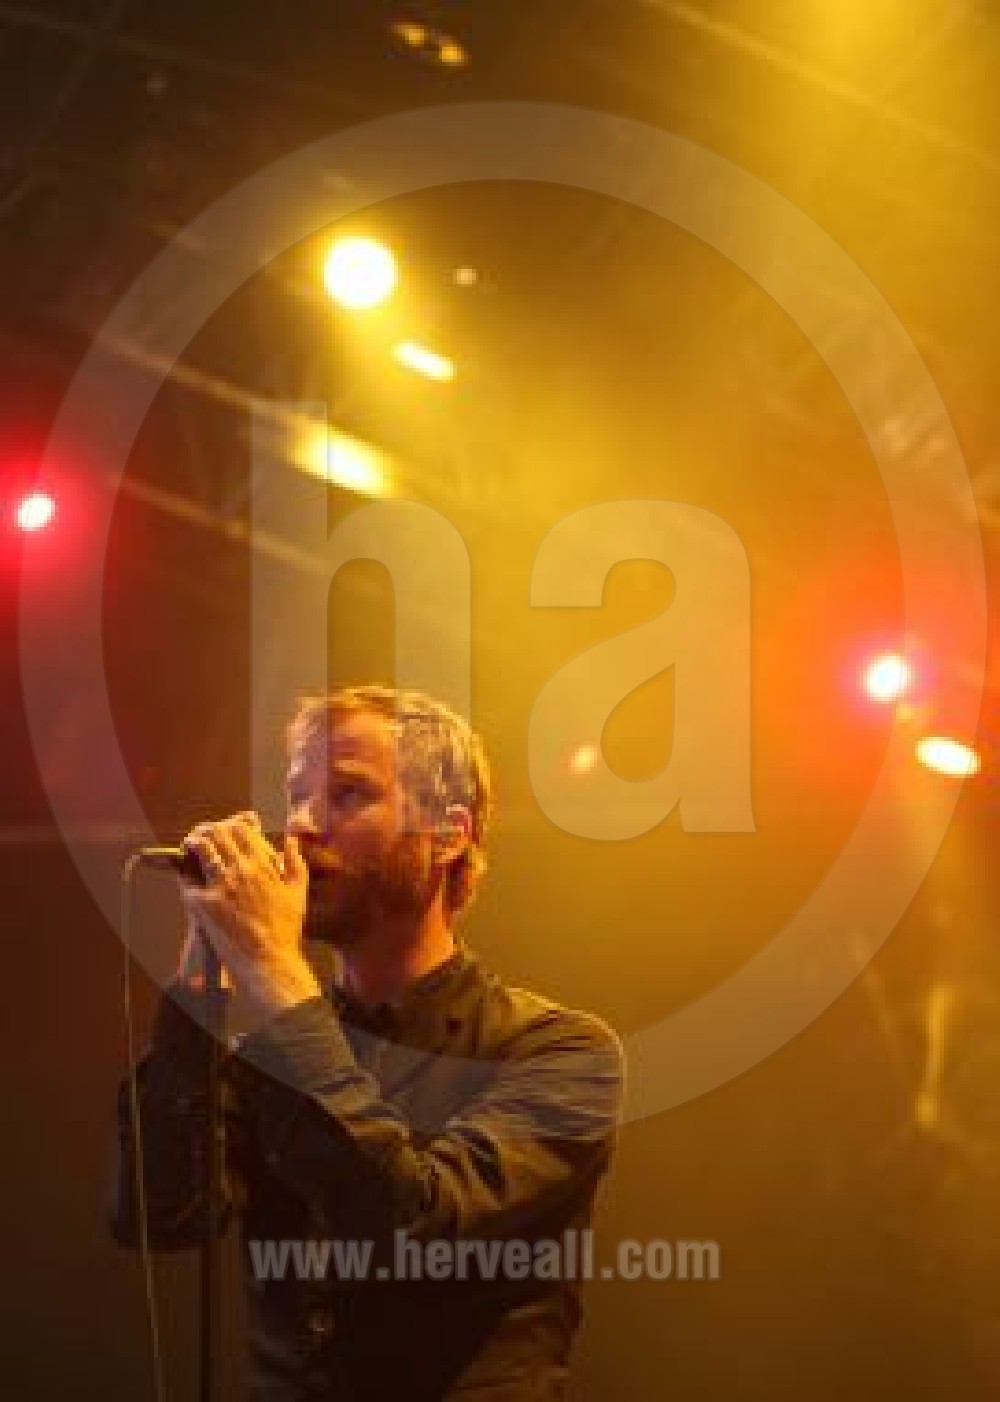 The national